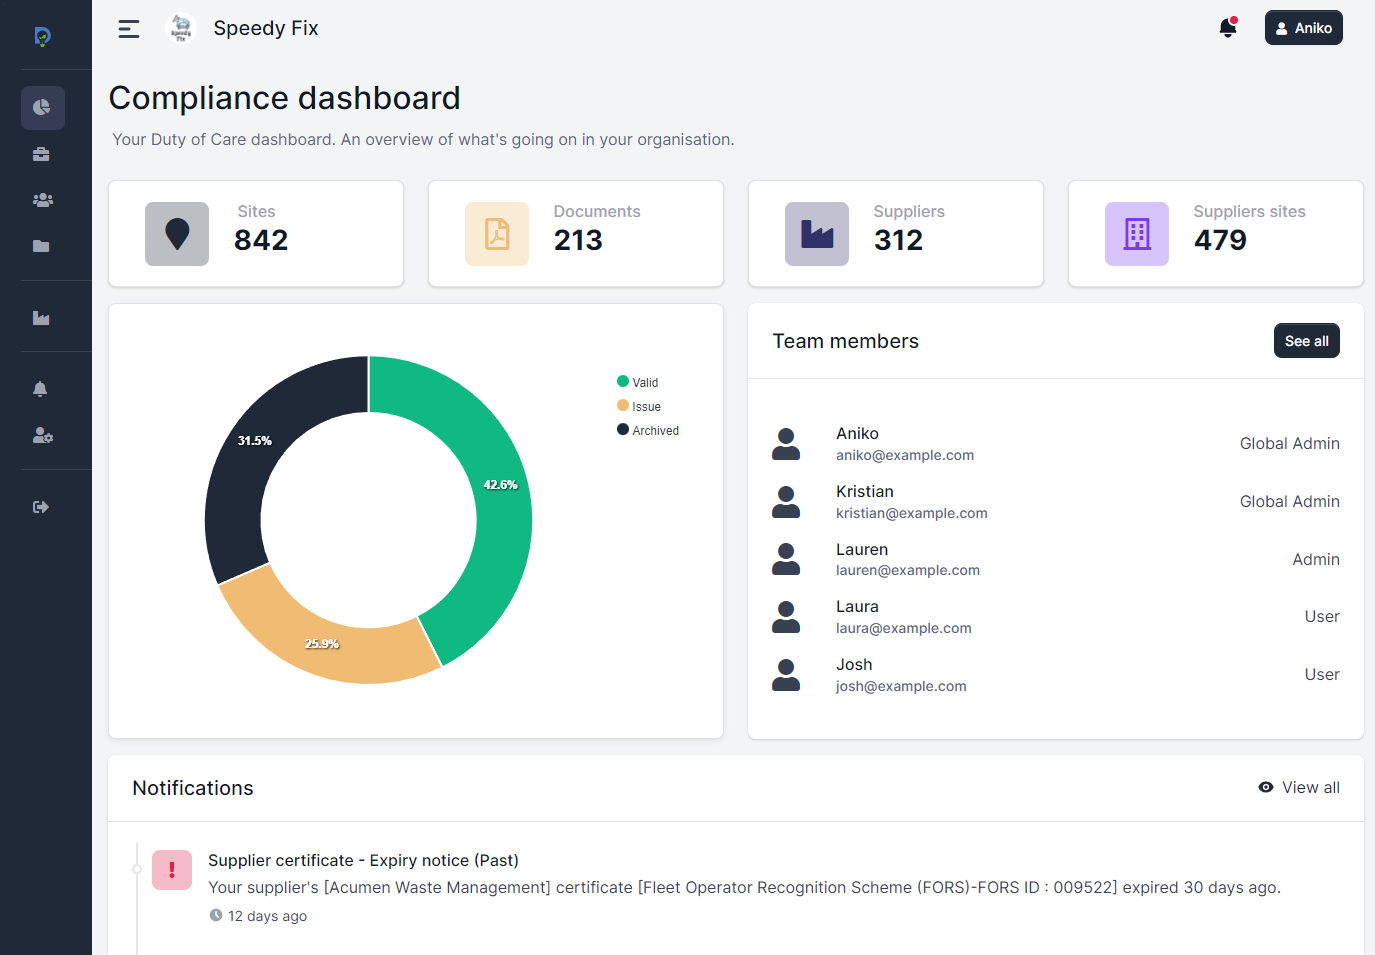 Preview od Dsposal's Compliance Dashboard showing thats this organisation has 842 sites, 213 documents and then 312 suppliers and 479 supplier sites.